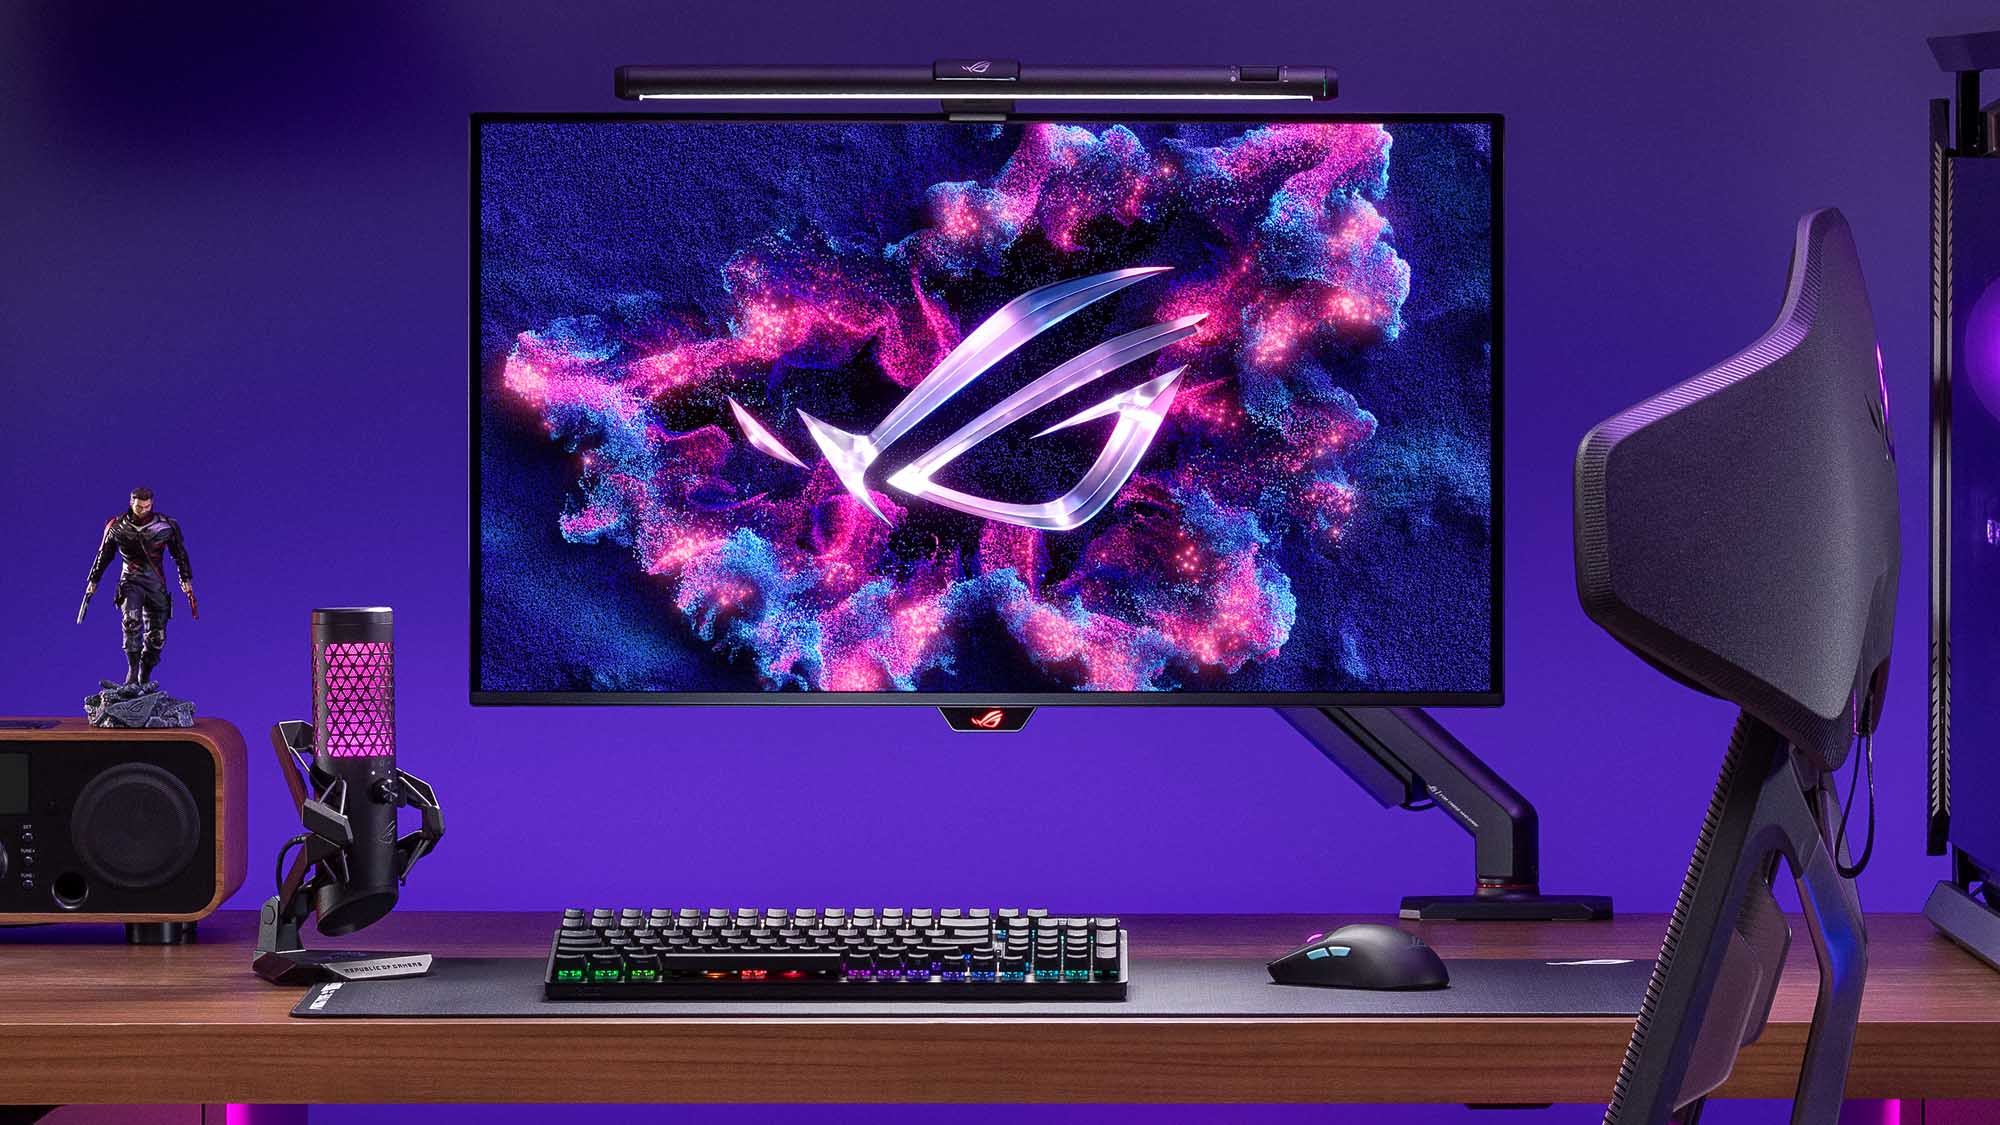 Asus has a 32-inch 4K gaming monitor with HDMI 2.1 shipping later